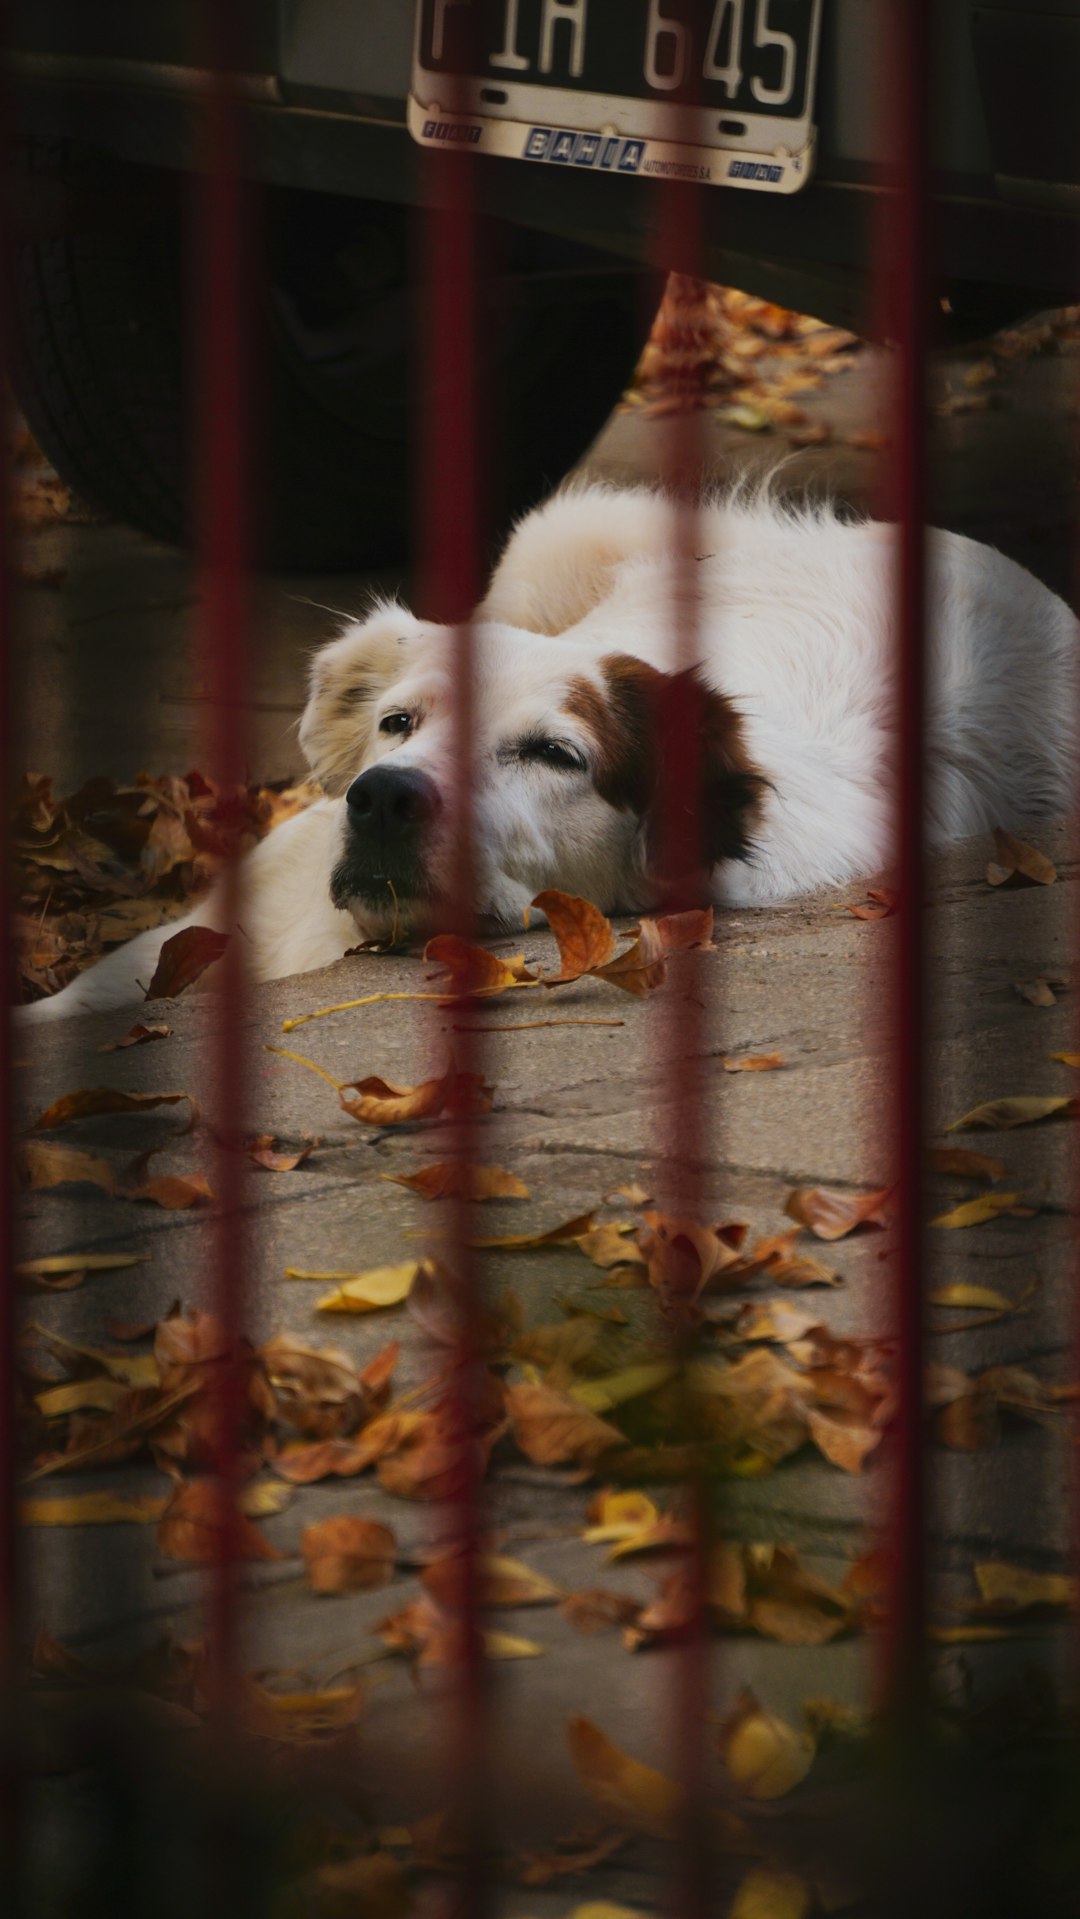 white and brown short coated dog lying on brown dried leaves